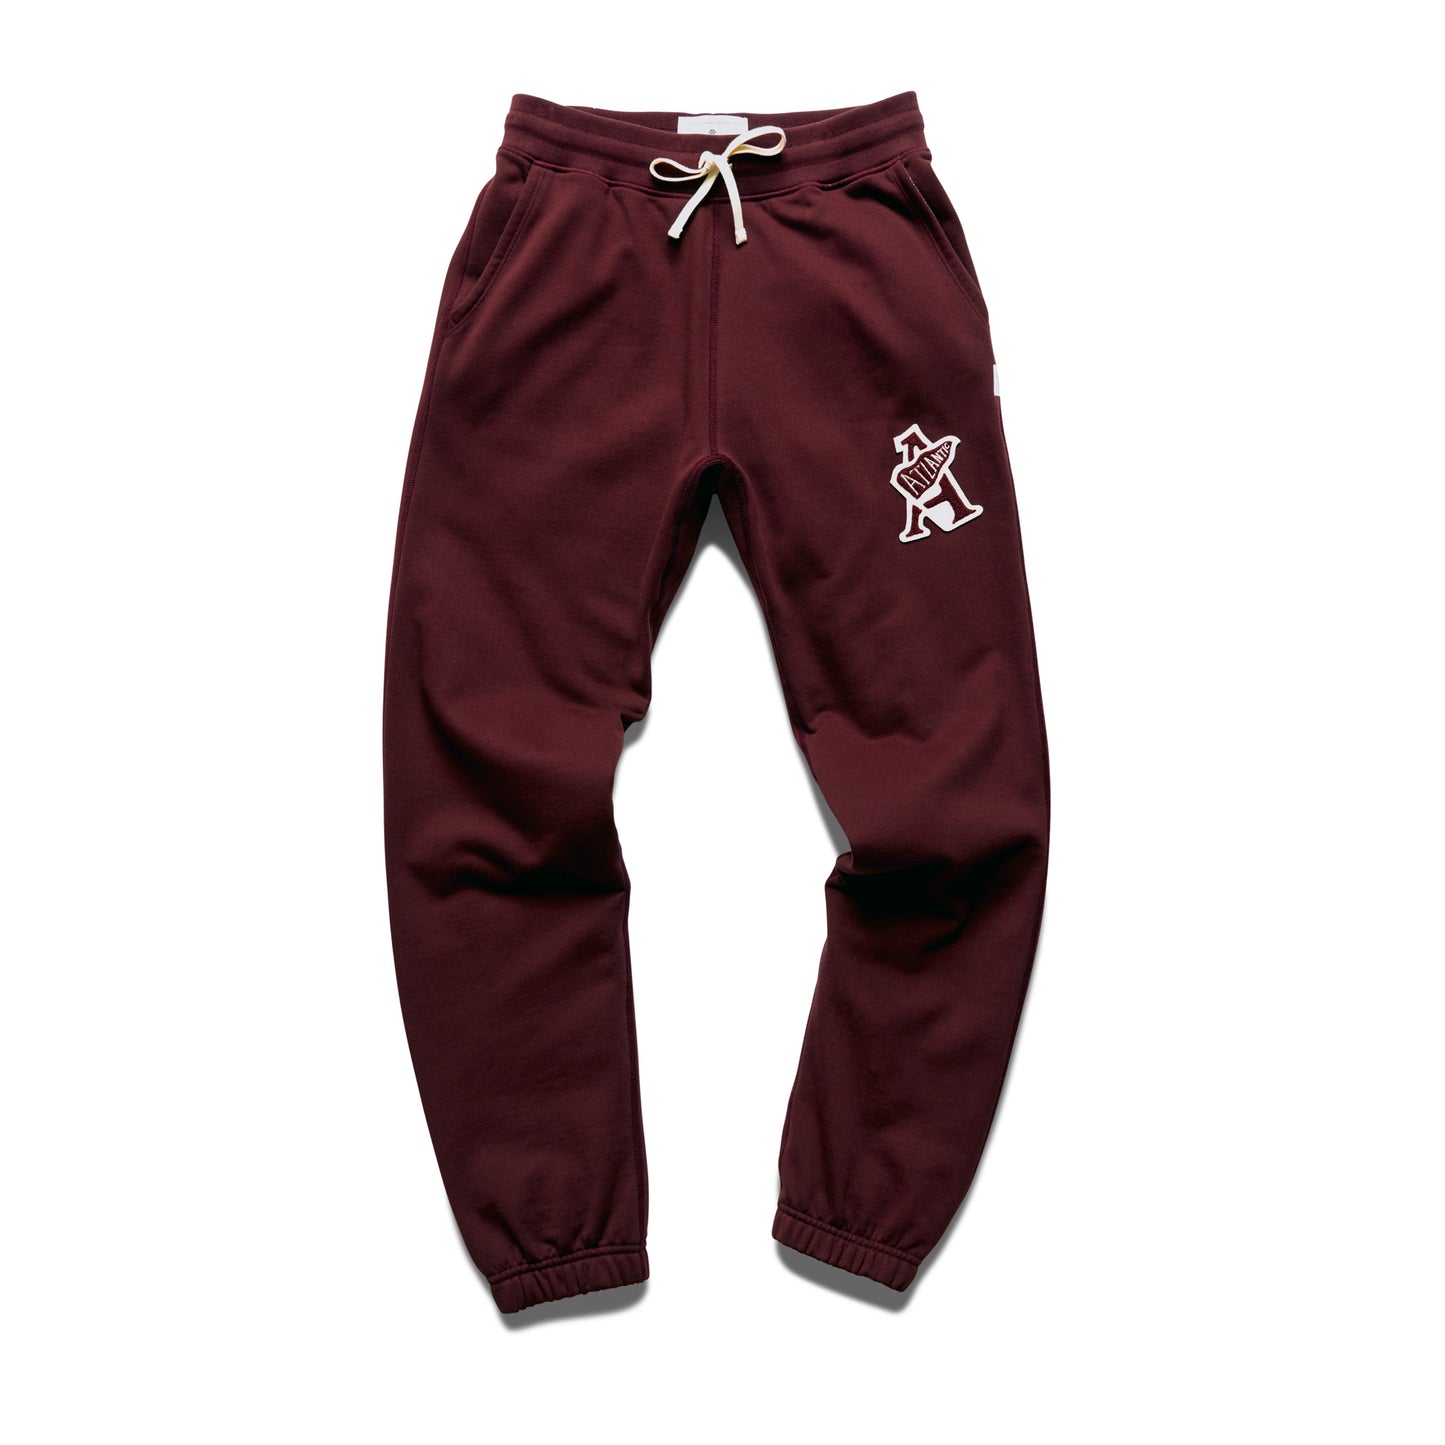 Midweight Terry Atlantic Cuffed Sweatpant